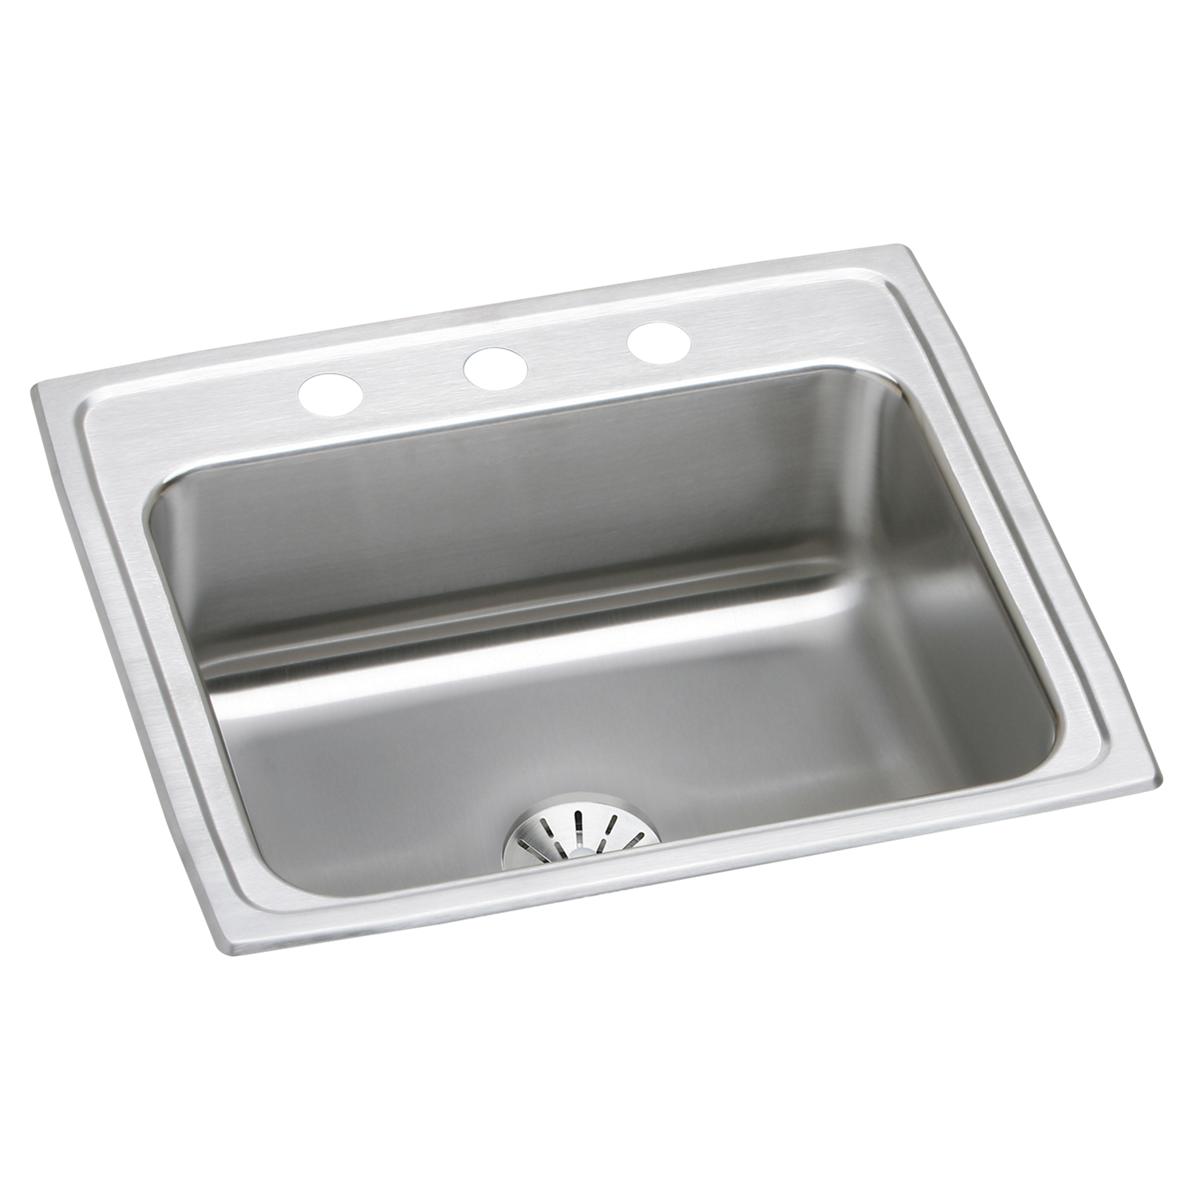 Elkay Lustertone Classic 22" x 19-1/2" x 7-5/8" MR2-Hole Single Bowl Drop-in Sink with Perfect Drain